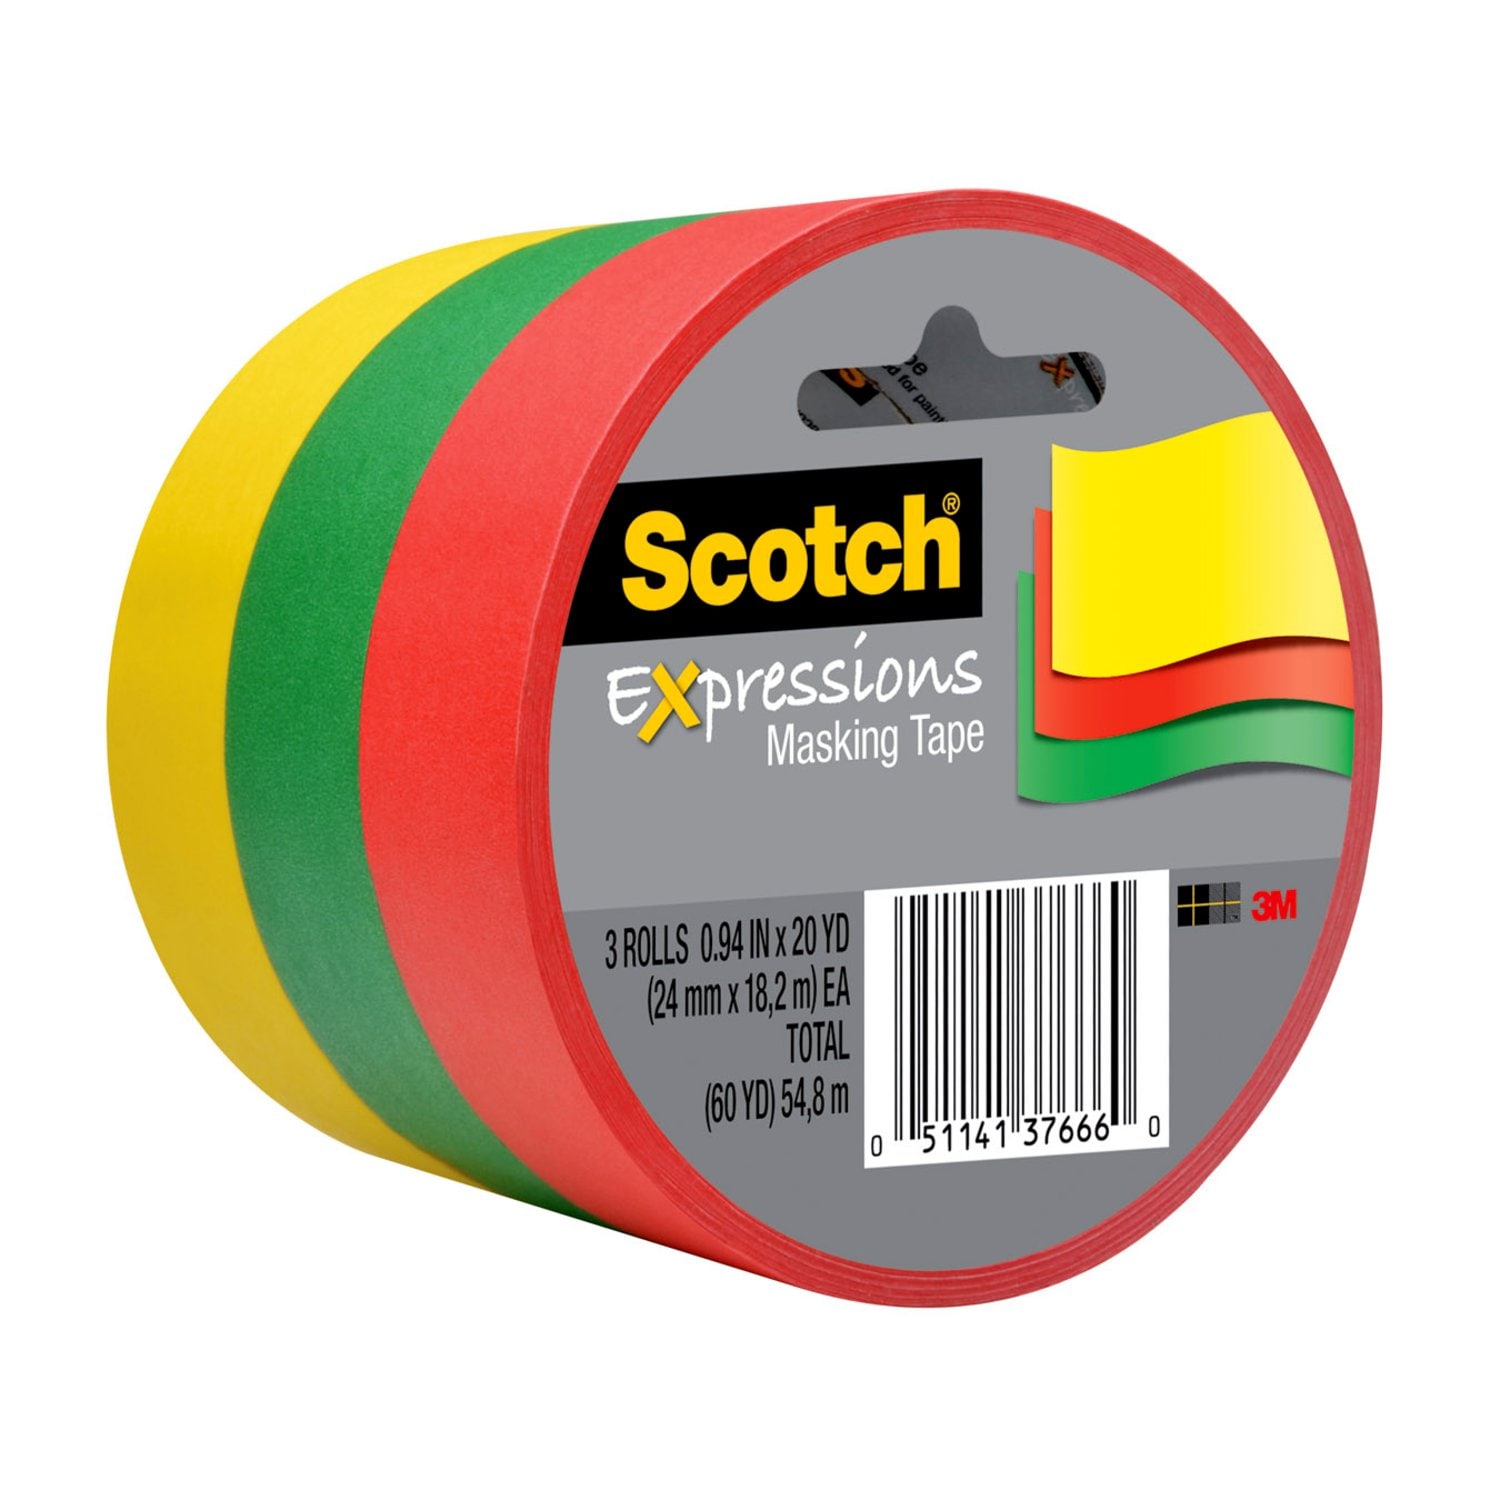 7100078719 - Scotch Expressions Masking Tape 3437-3PRM, 3PK Primary